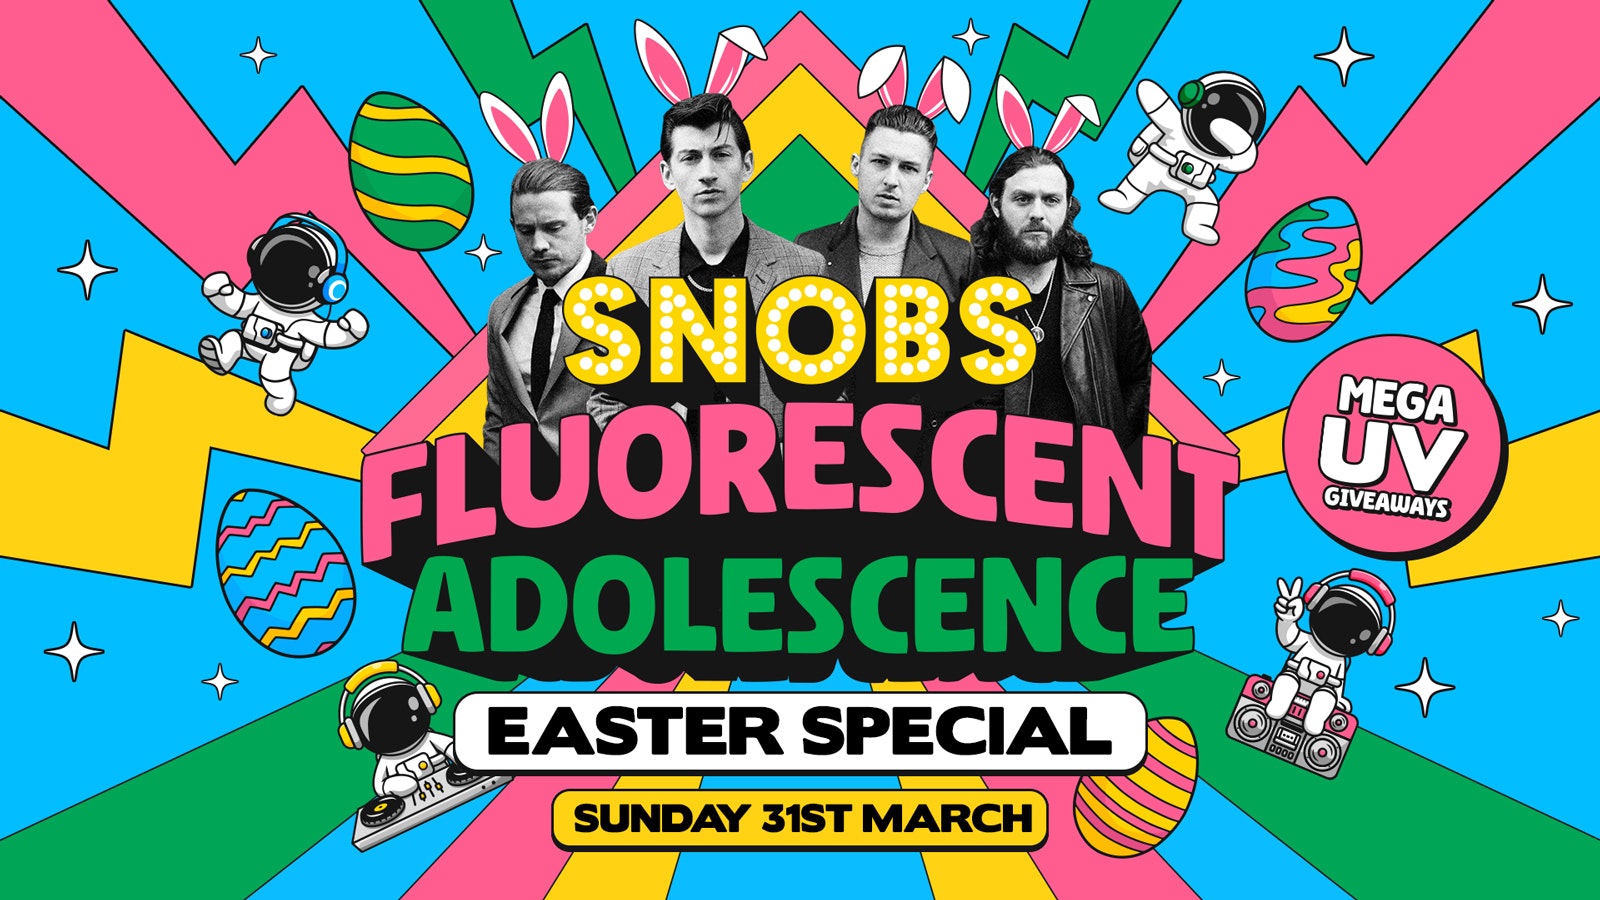 Fluorescent Adolescence!! 🐣 EASTER SUNDAY SPECIAL 🐣 31st March